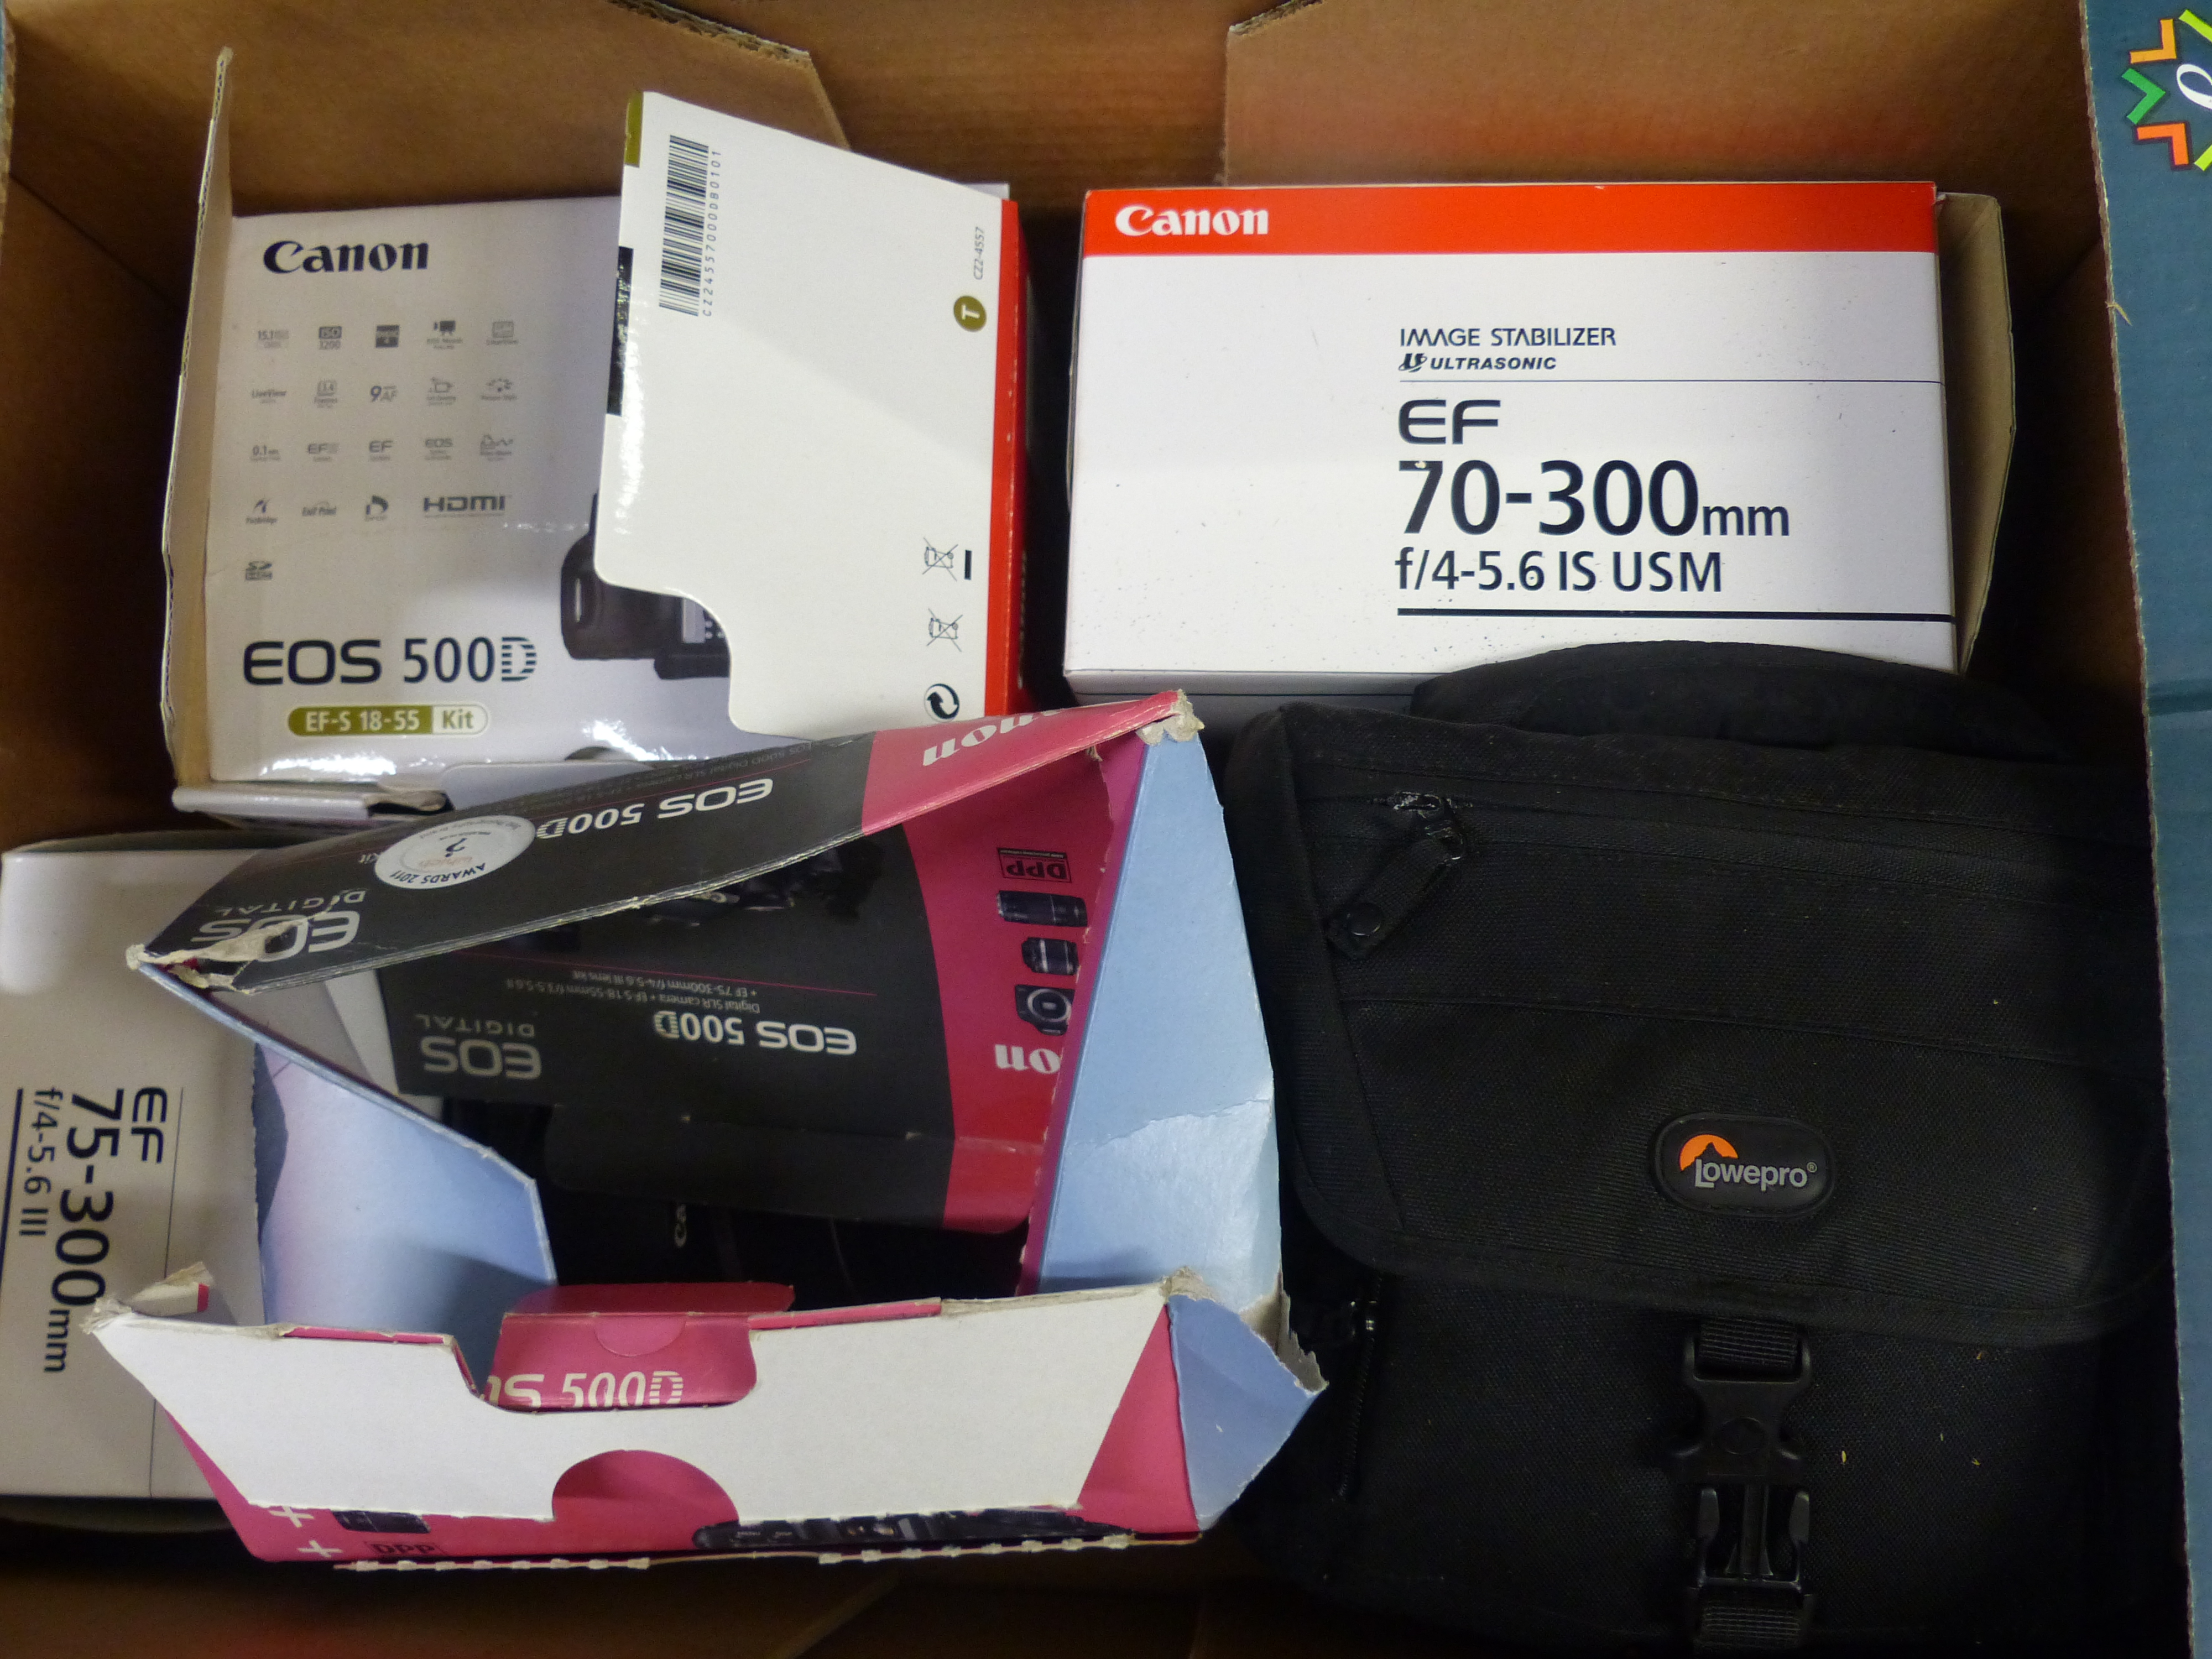 Canon EOS 500D camera with lens together with charging kit, 75-300 f/4-5.6III lens (boxed), 70-300mm